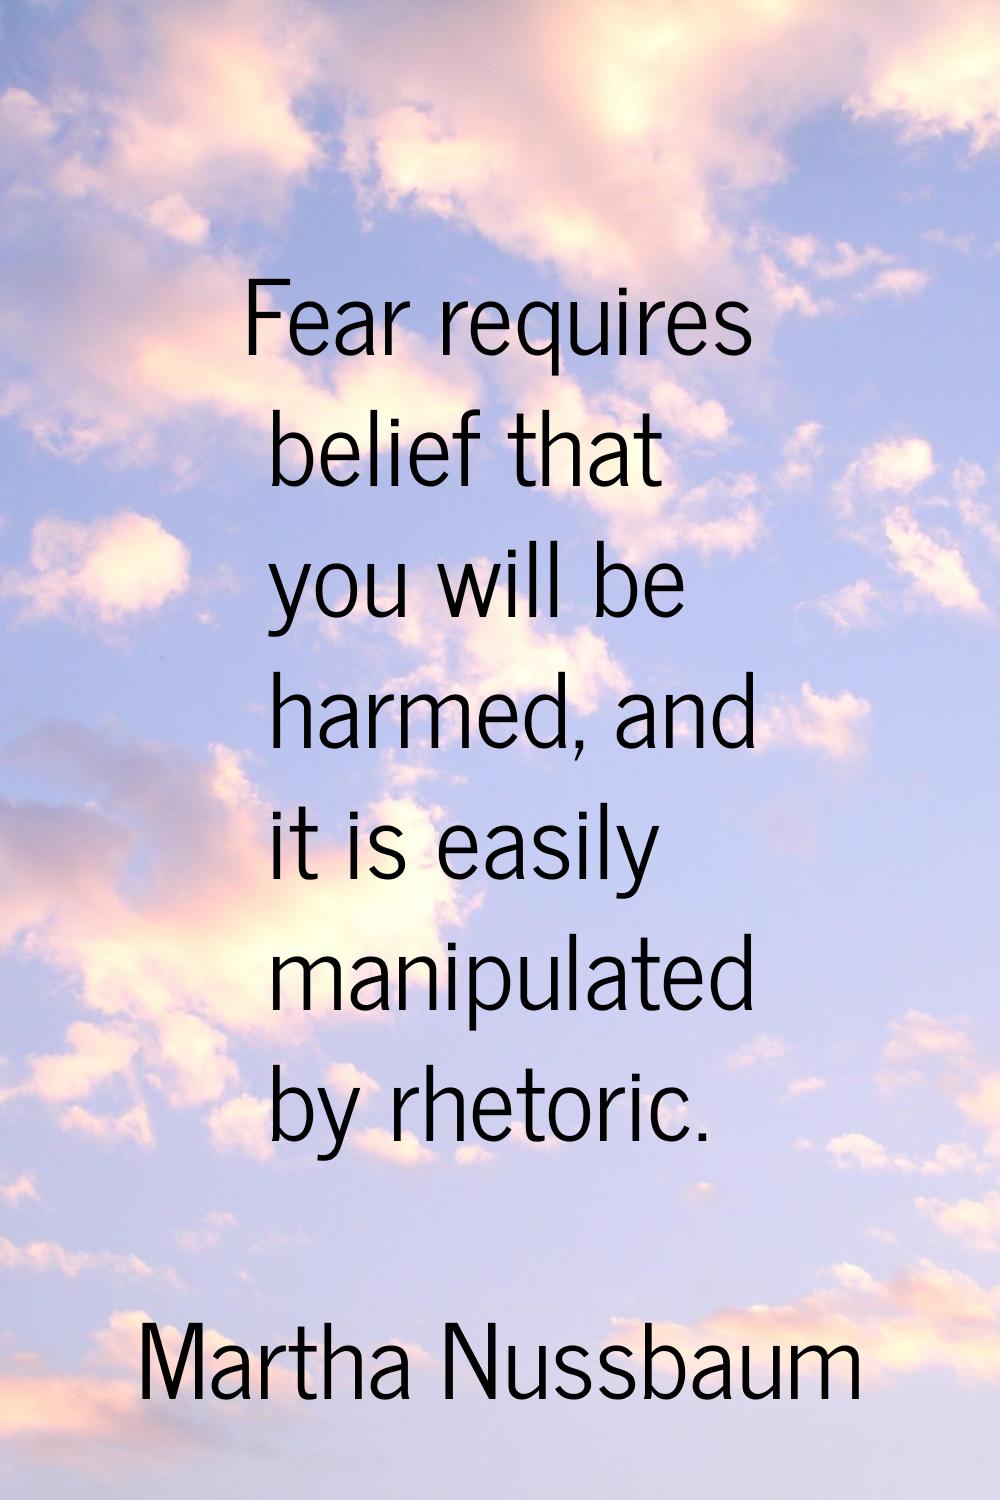 Fear requires belief that you will be harmed, and it is easily manipulated by rhetoric.